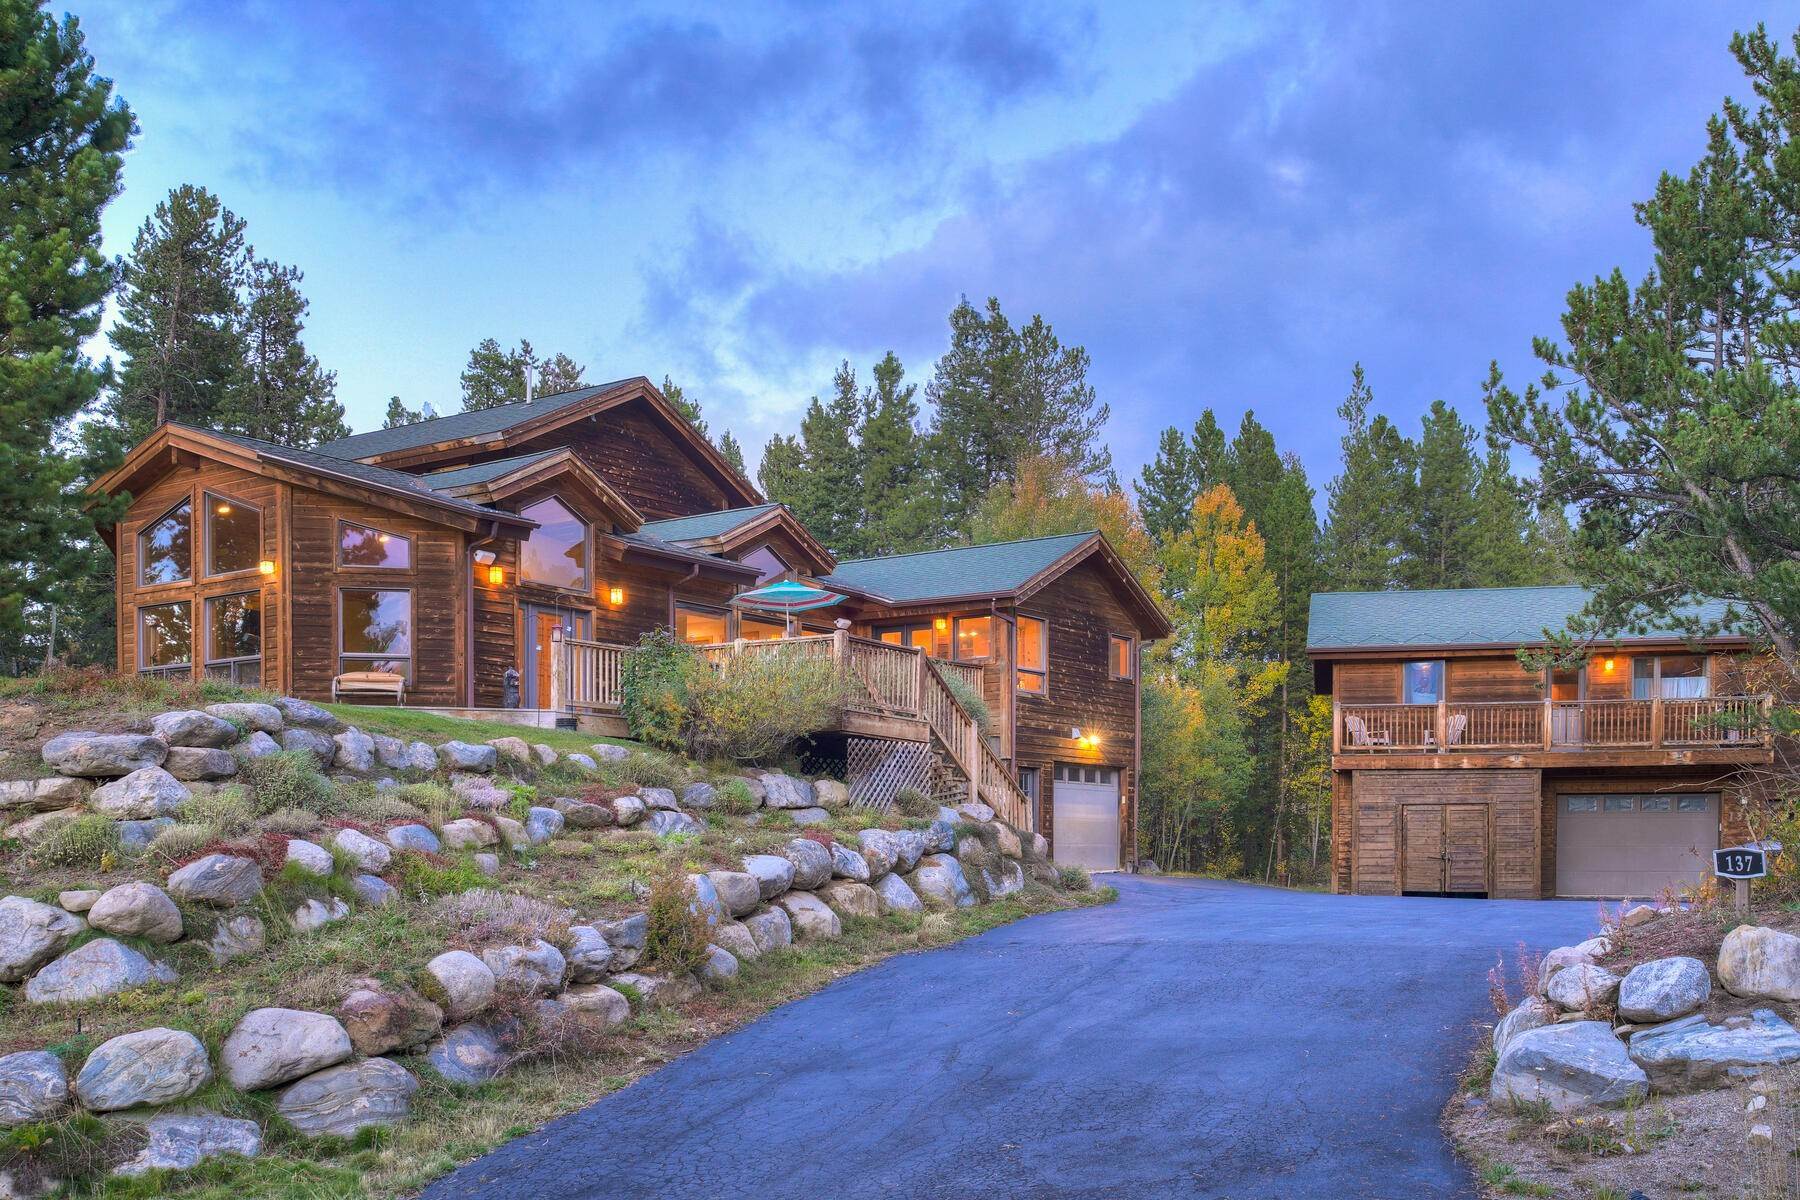 Single Family Homes for Active at Convenient Location with Great Views in Breck 137 Moonstone Road Breckenridge, Colorado 80424 United States